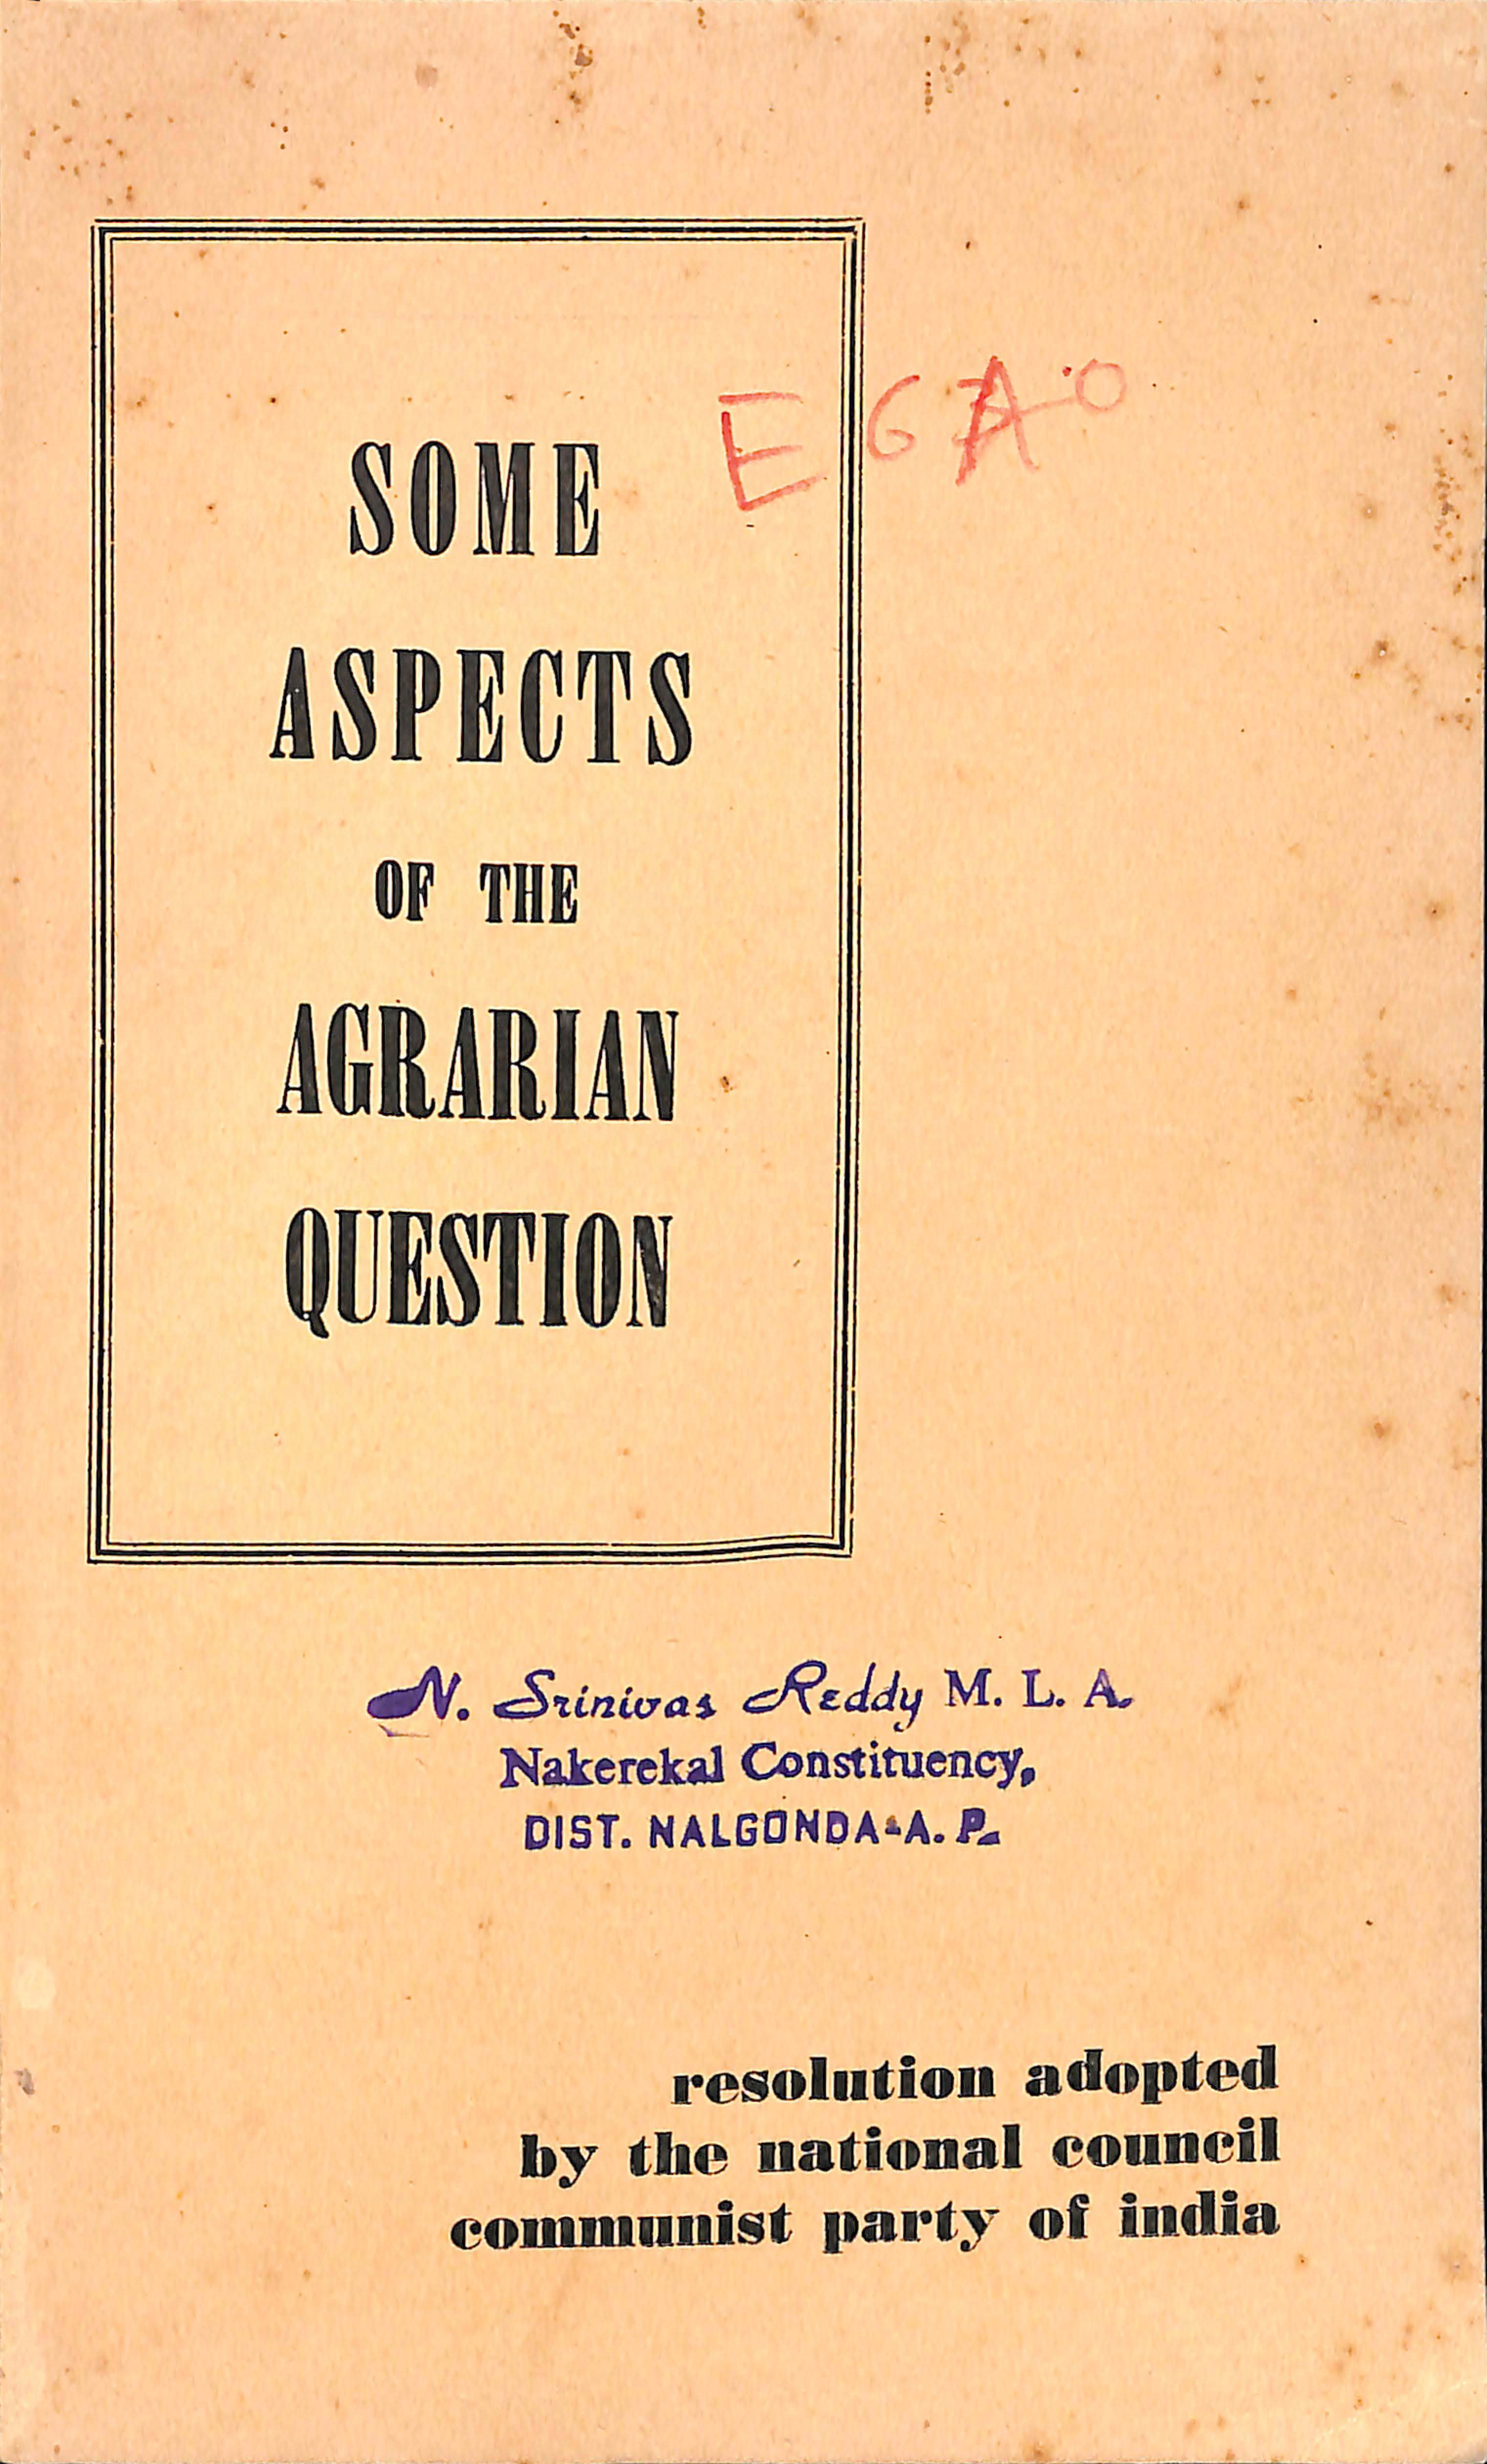 Some aspects of the agrarian question